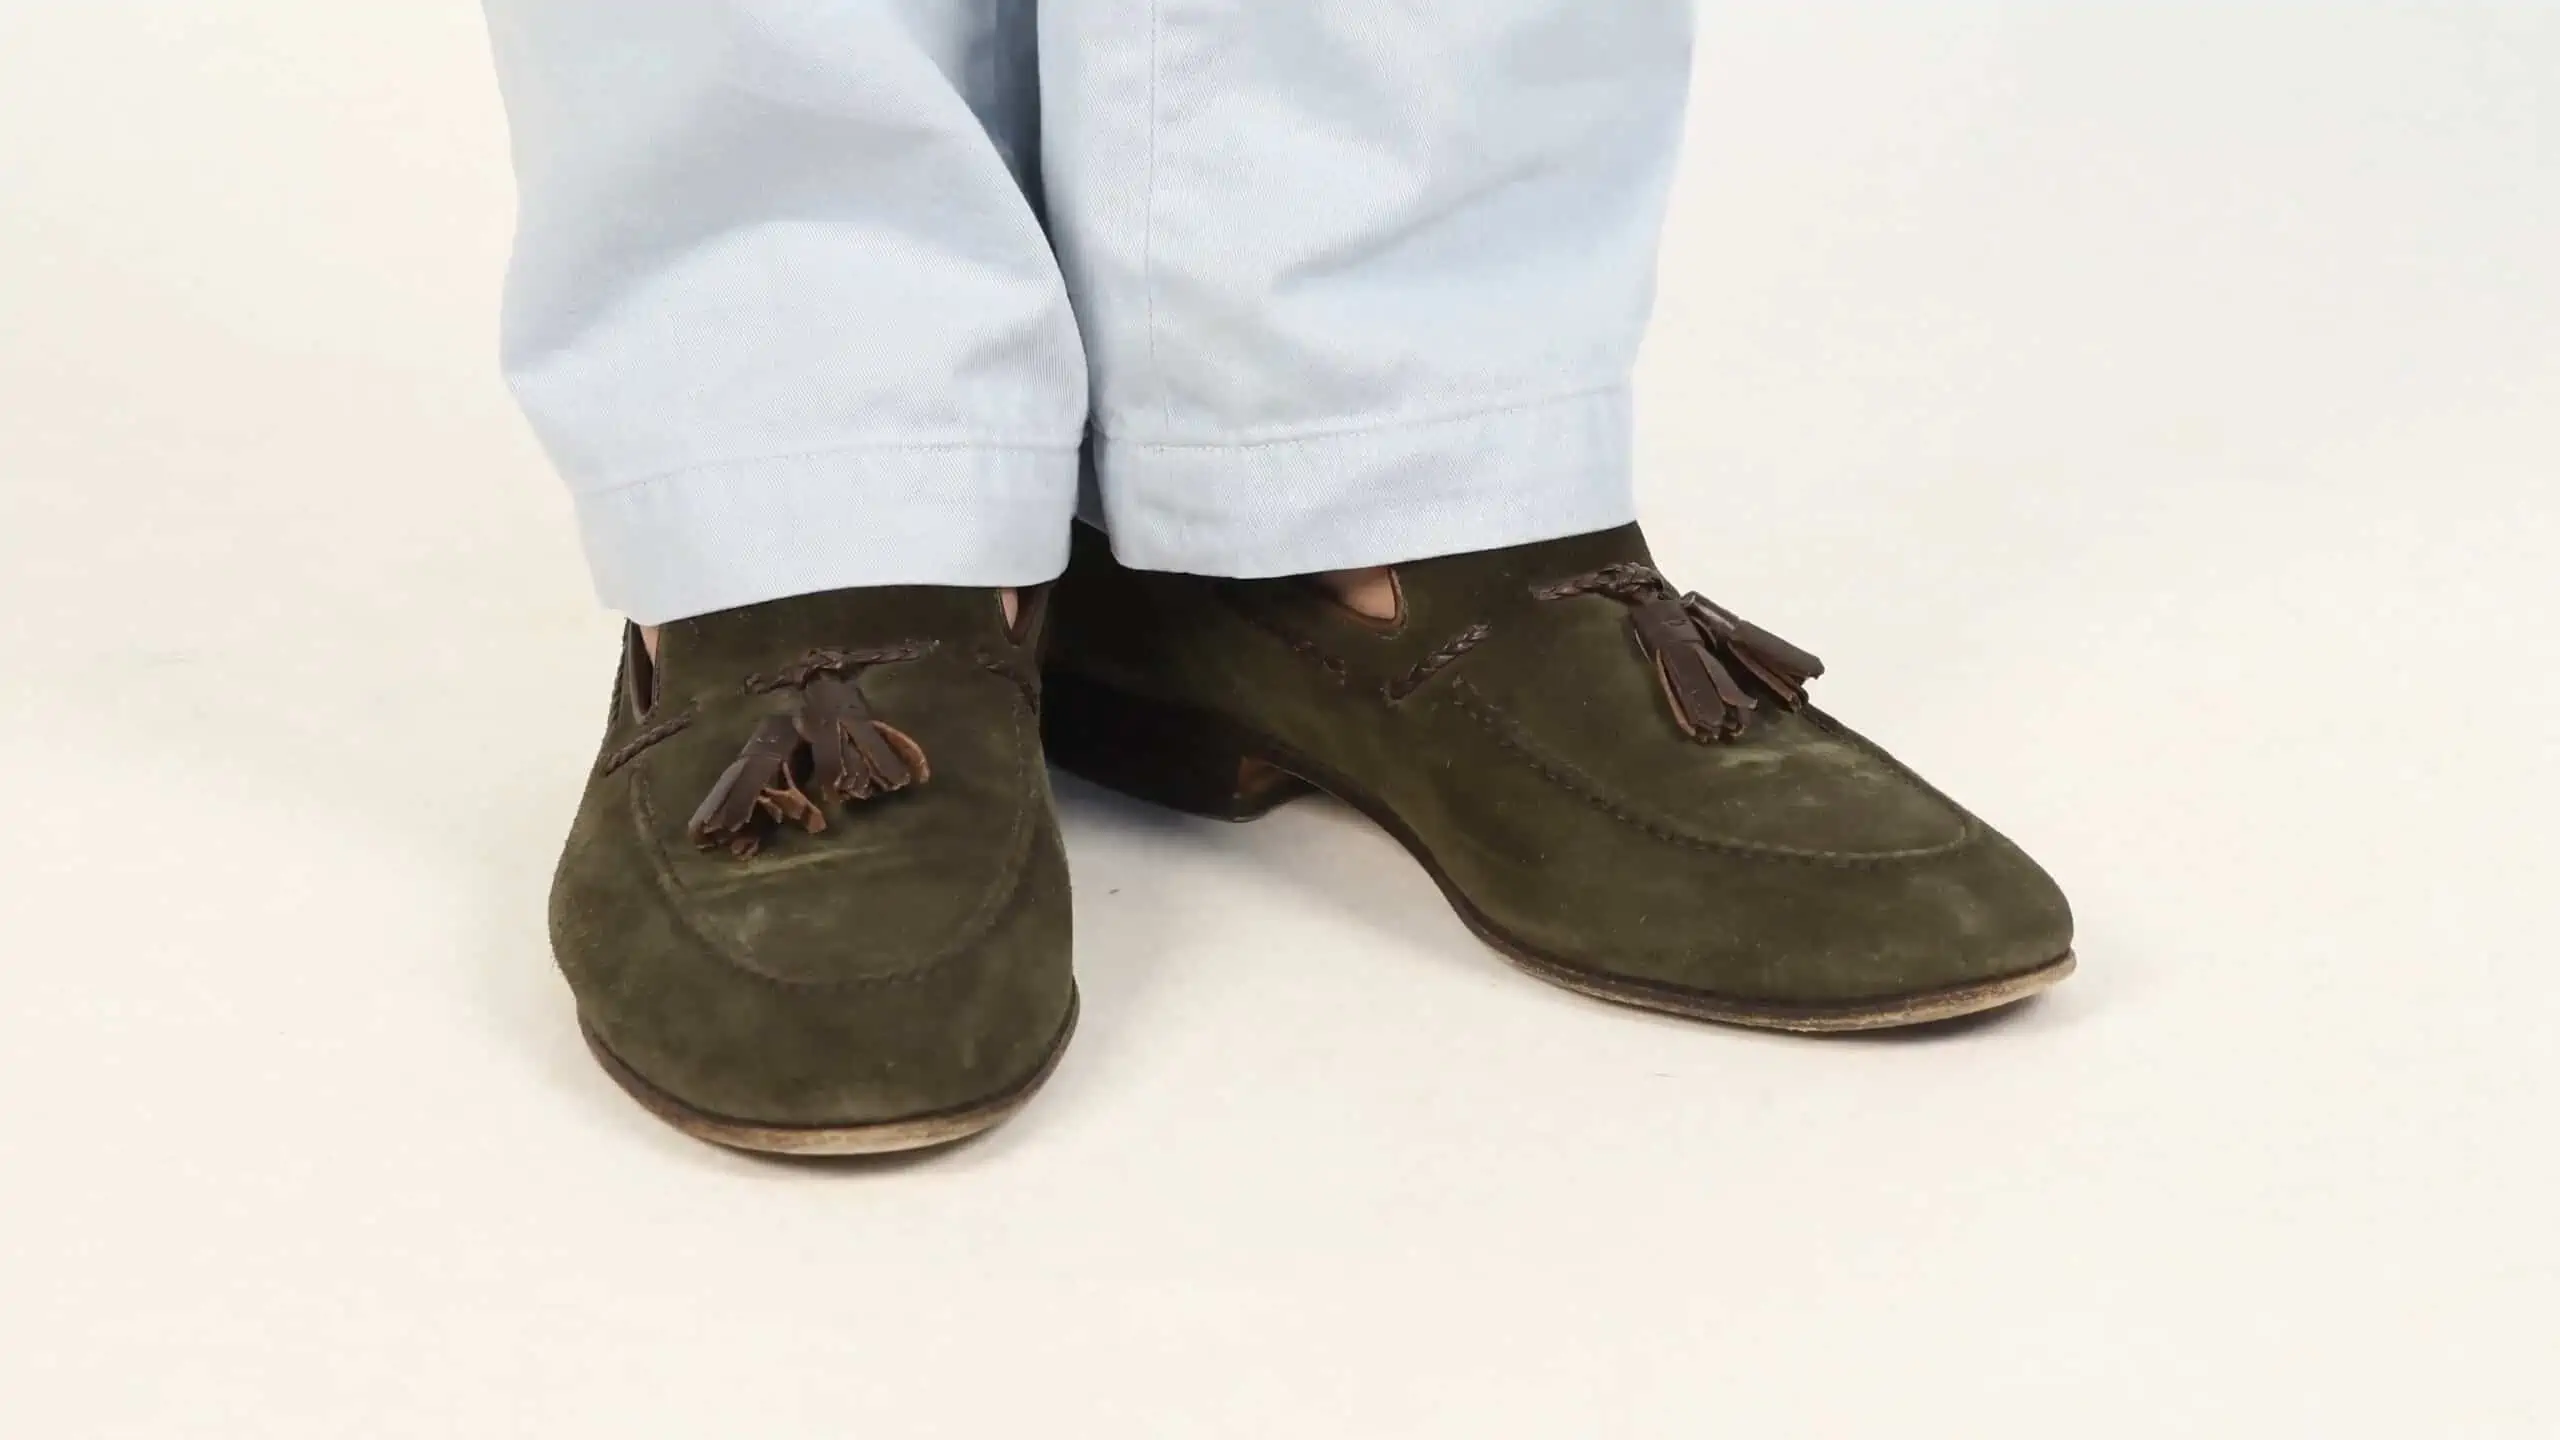 Suded tassel loafers in a dark olive green shade